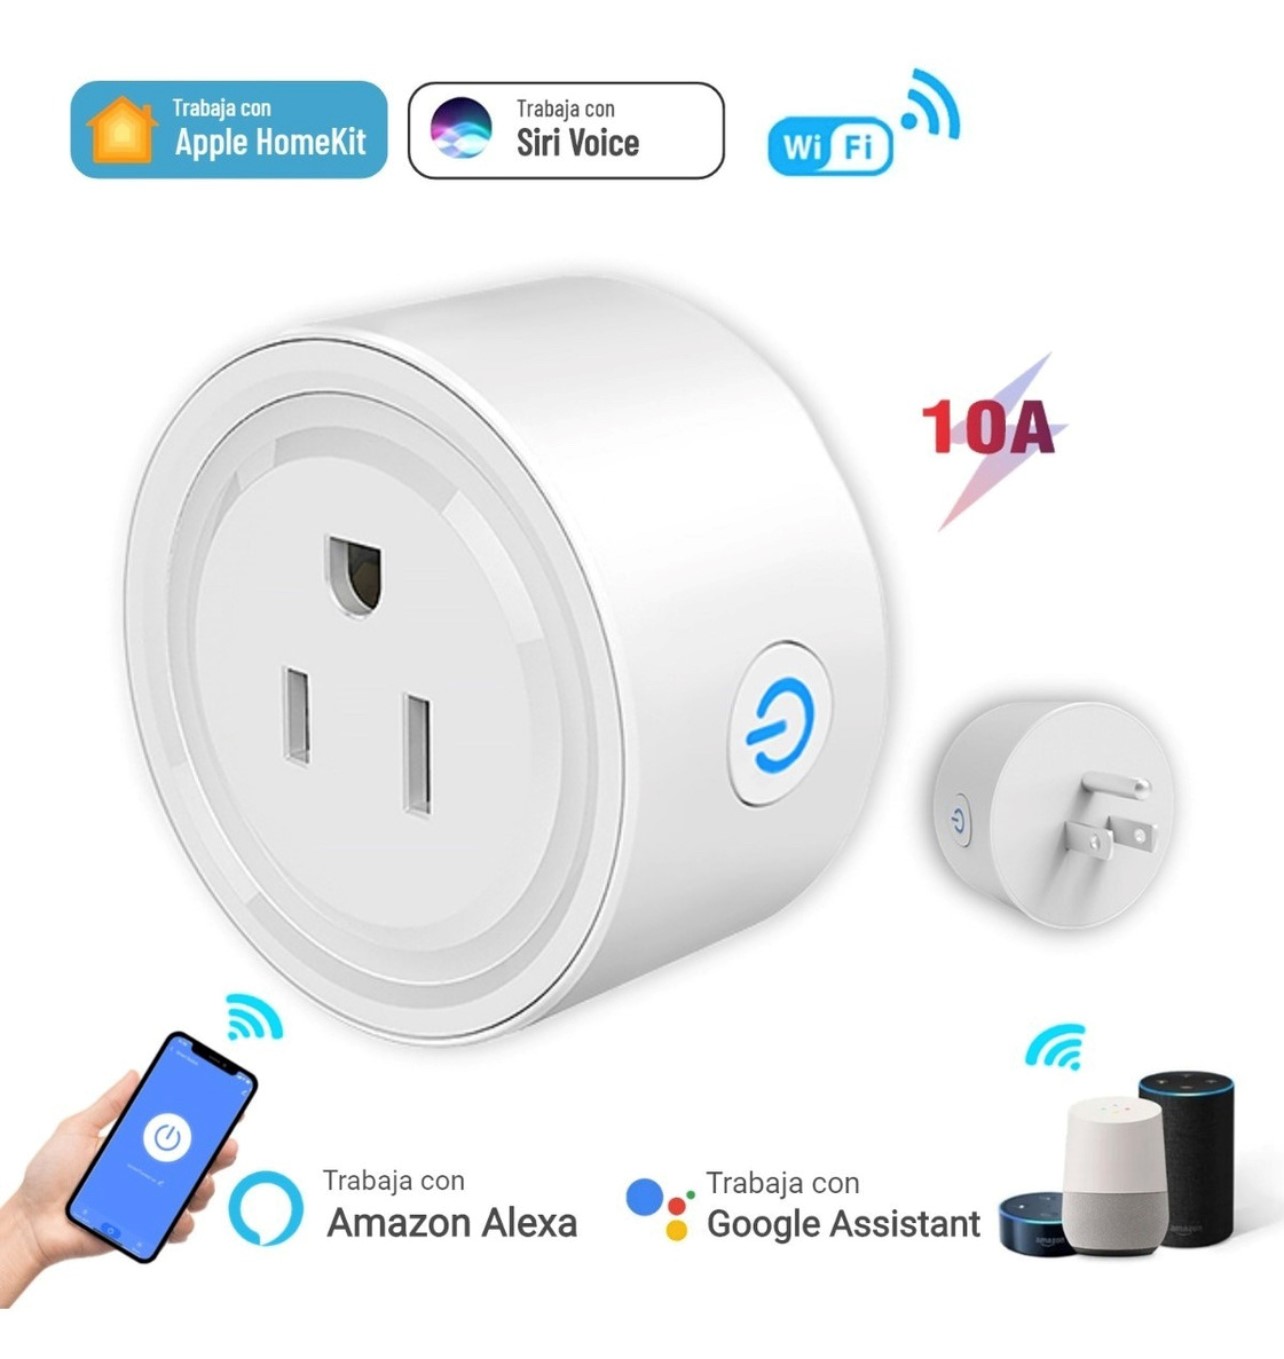 15 Amp Outdoor Alexa/Google Assistant Compatible Plug -in Smart Wi-Fi Dual Outlet Wall Plug, No Hub Required (3-pack)